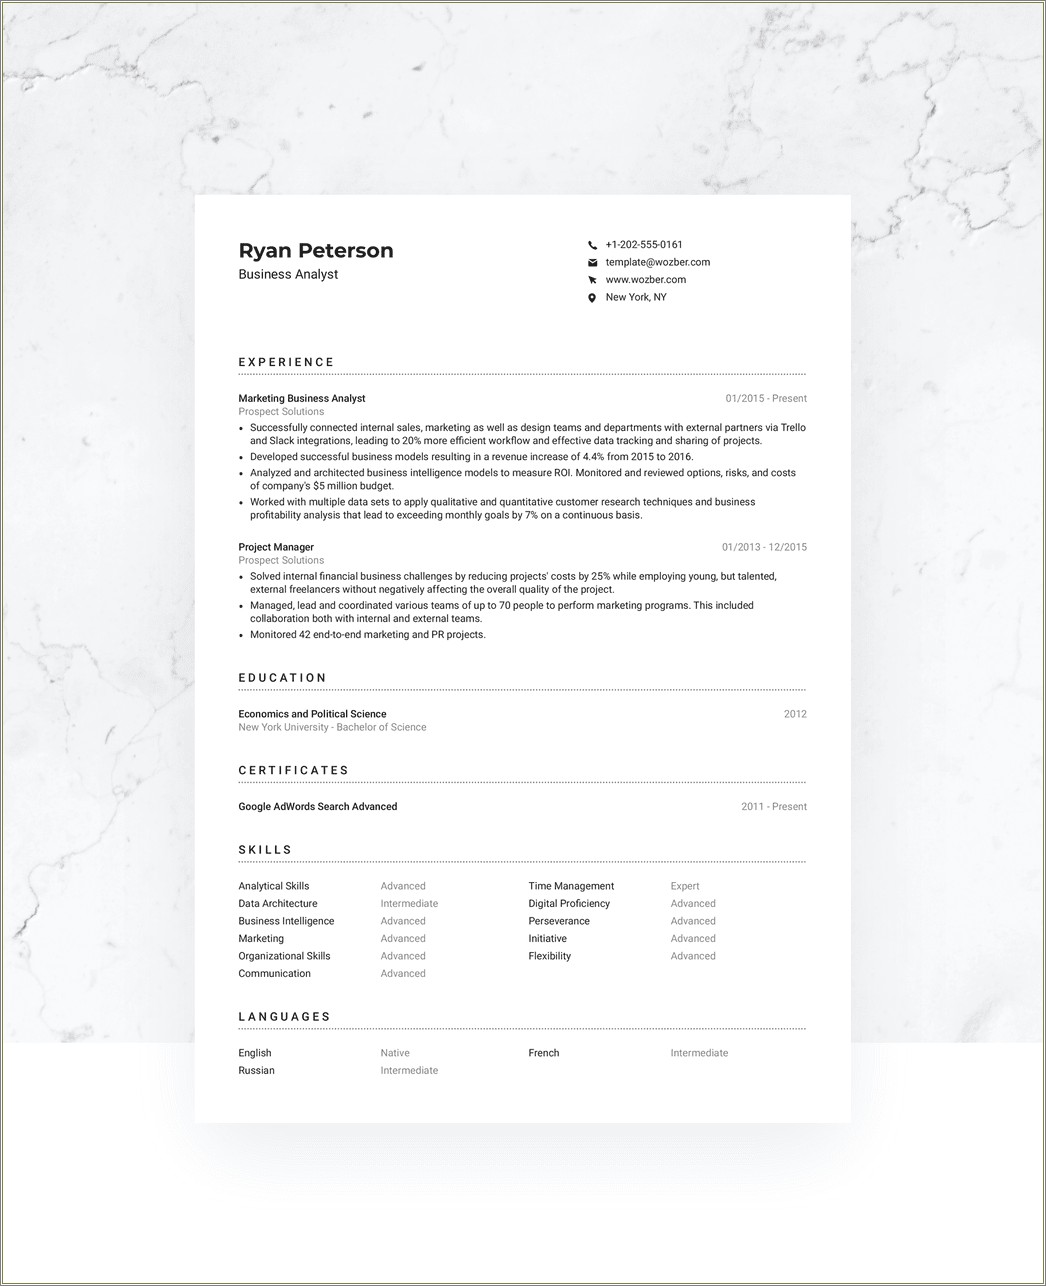 Mca Experience Resume Format Free Download